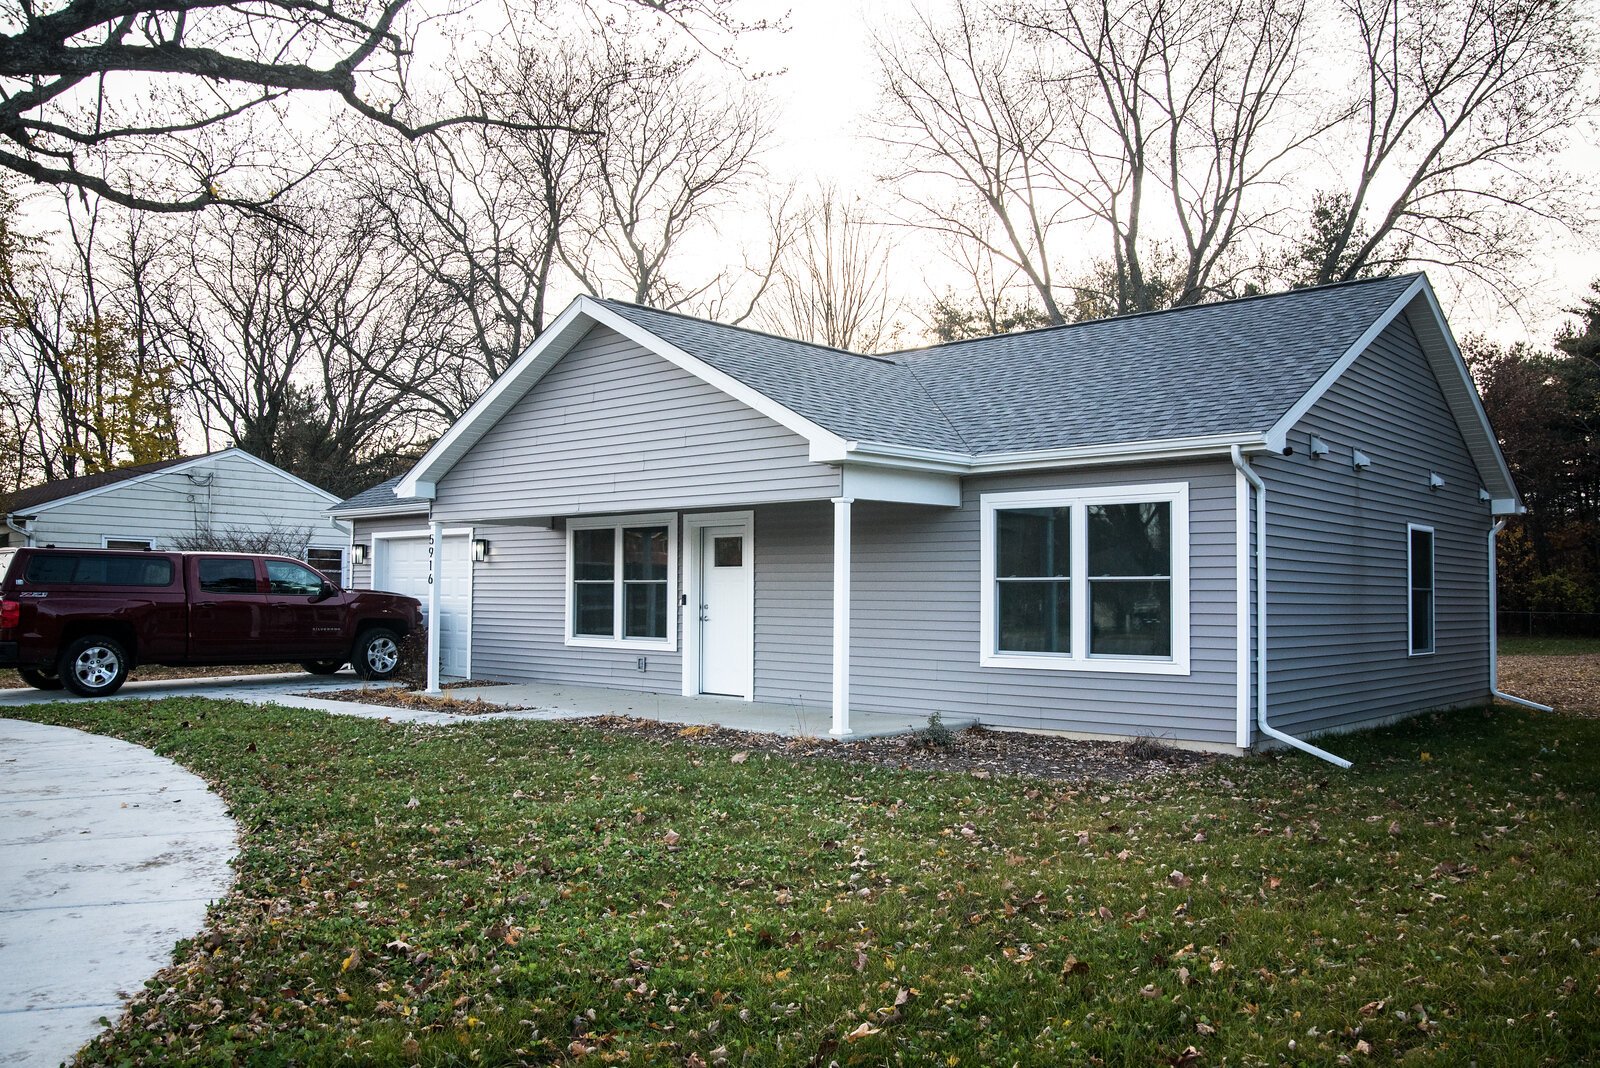 Blaise Boulding's new house on Oakland Drive in Portage was a project of Kalamazoo Neighborhood Housing Services, built with funding from the Kalamazoo County affordable housing millage.